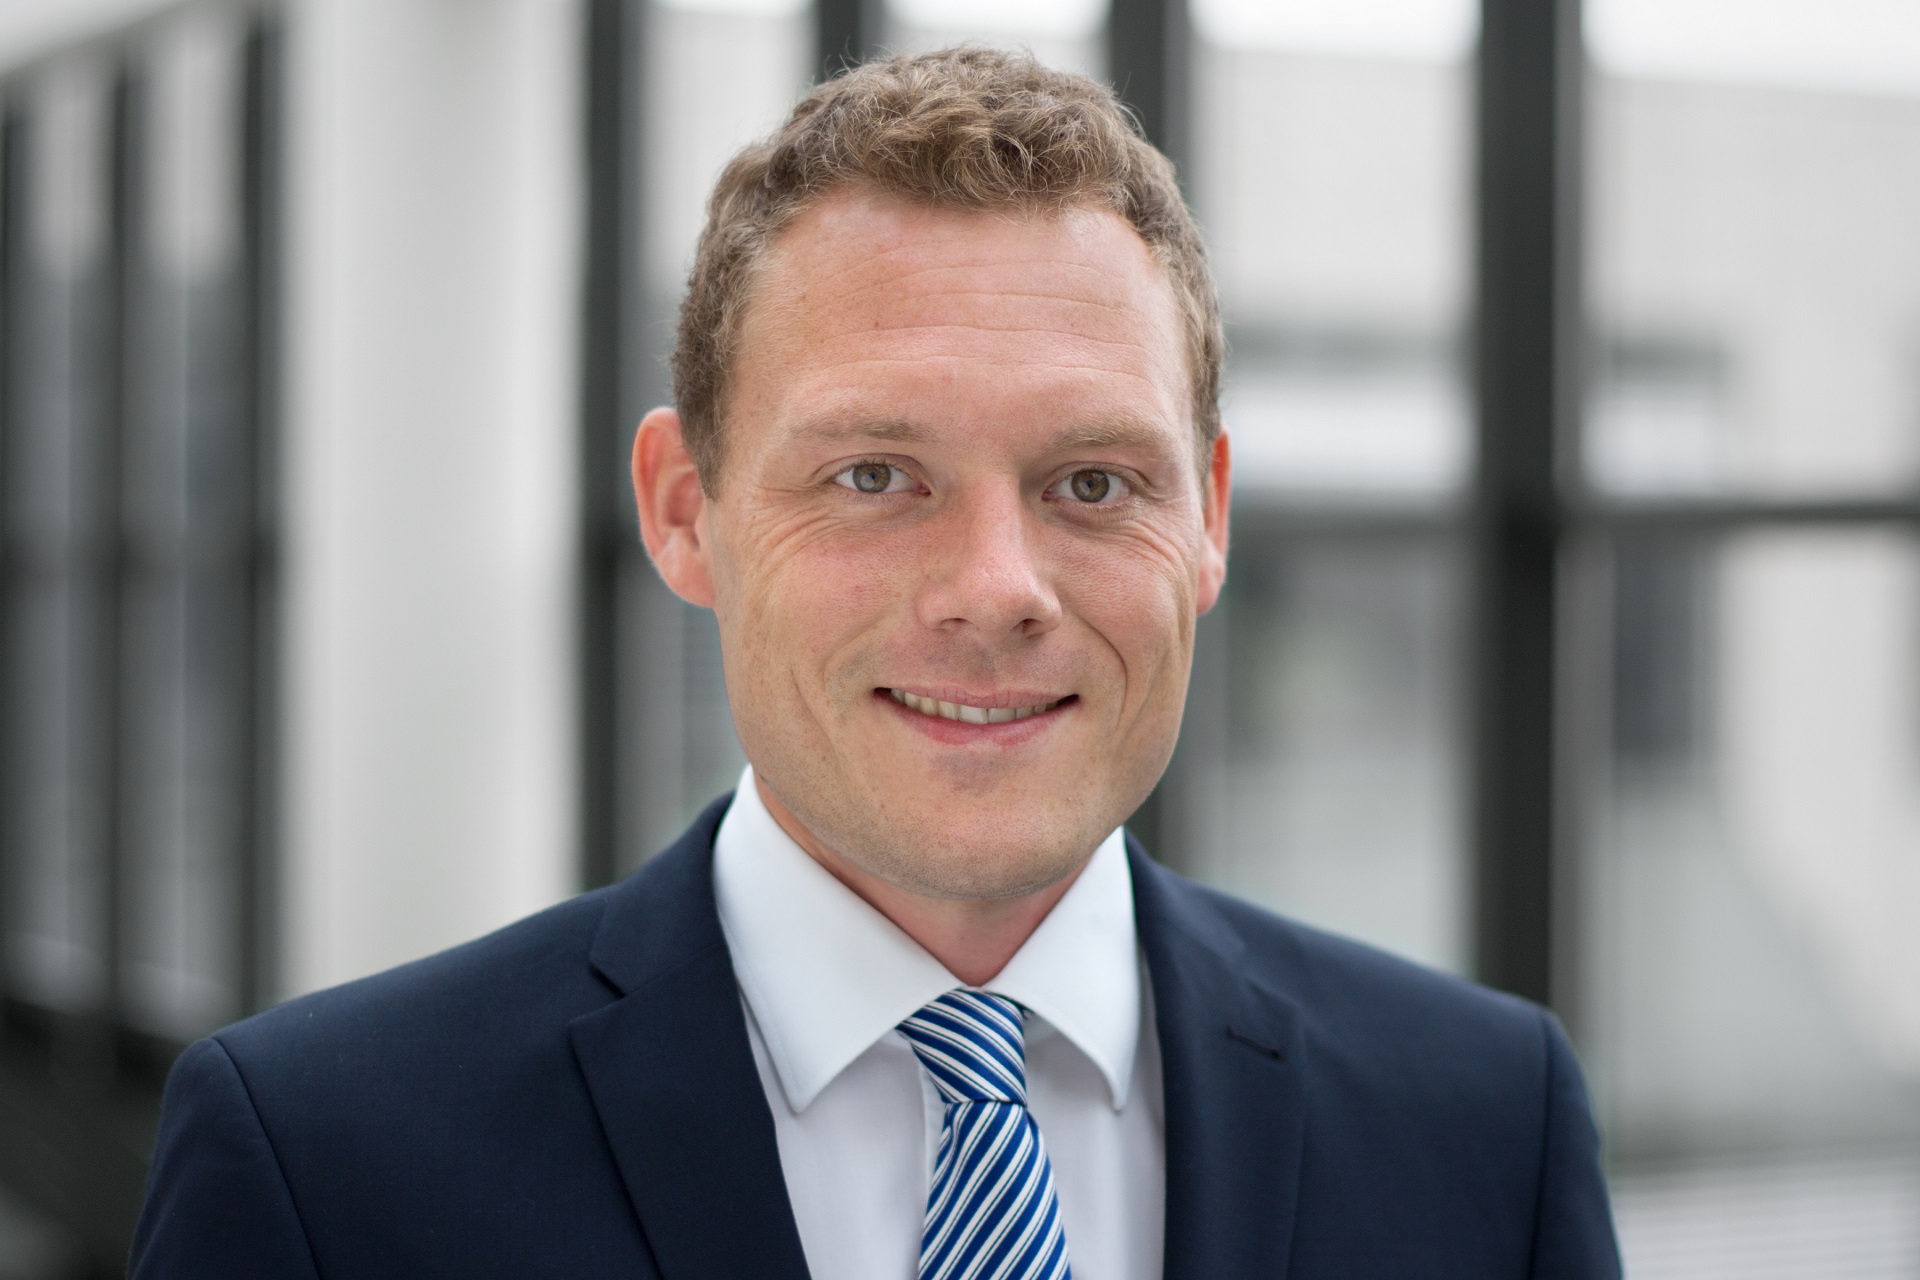 Dr. Hermann Uchtmann, Technology and Innovation Management at Schuler Pressen: “Schuler decided in favor of transfer technology for the high-volume production of BPP, for which we supply the forming technology and automation.”